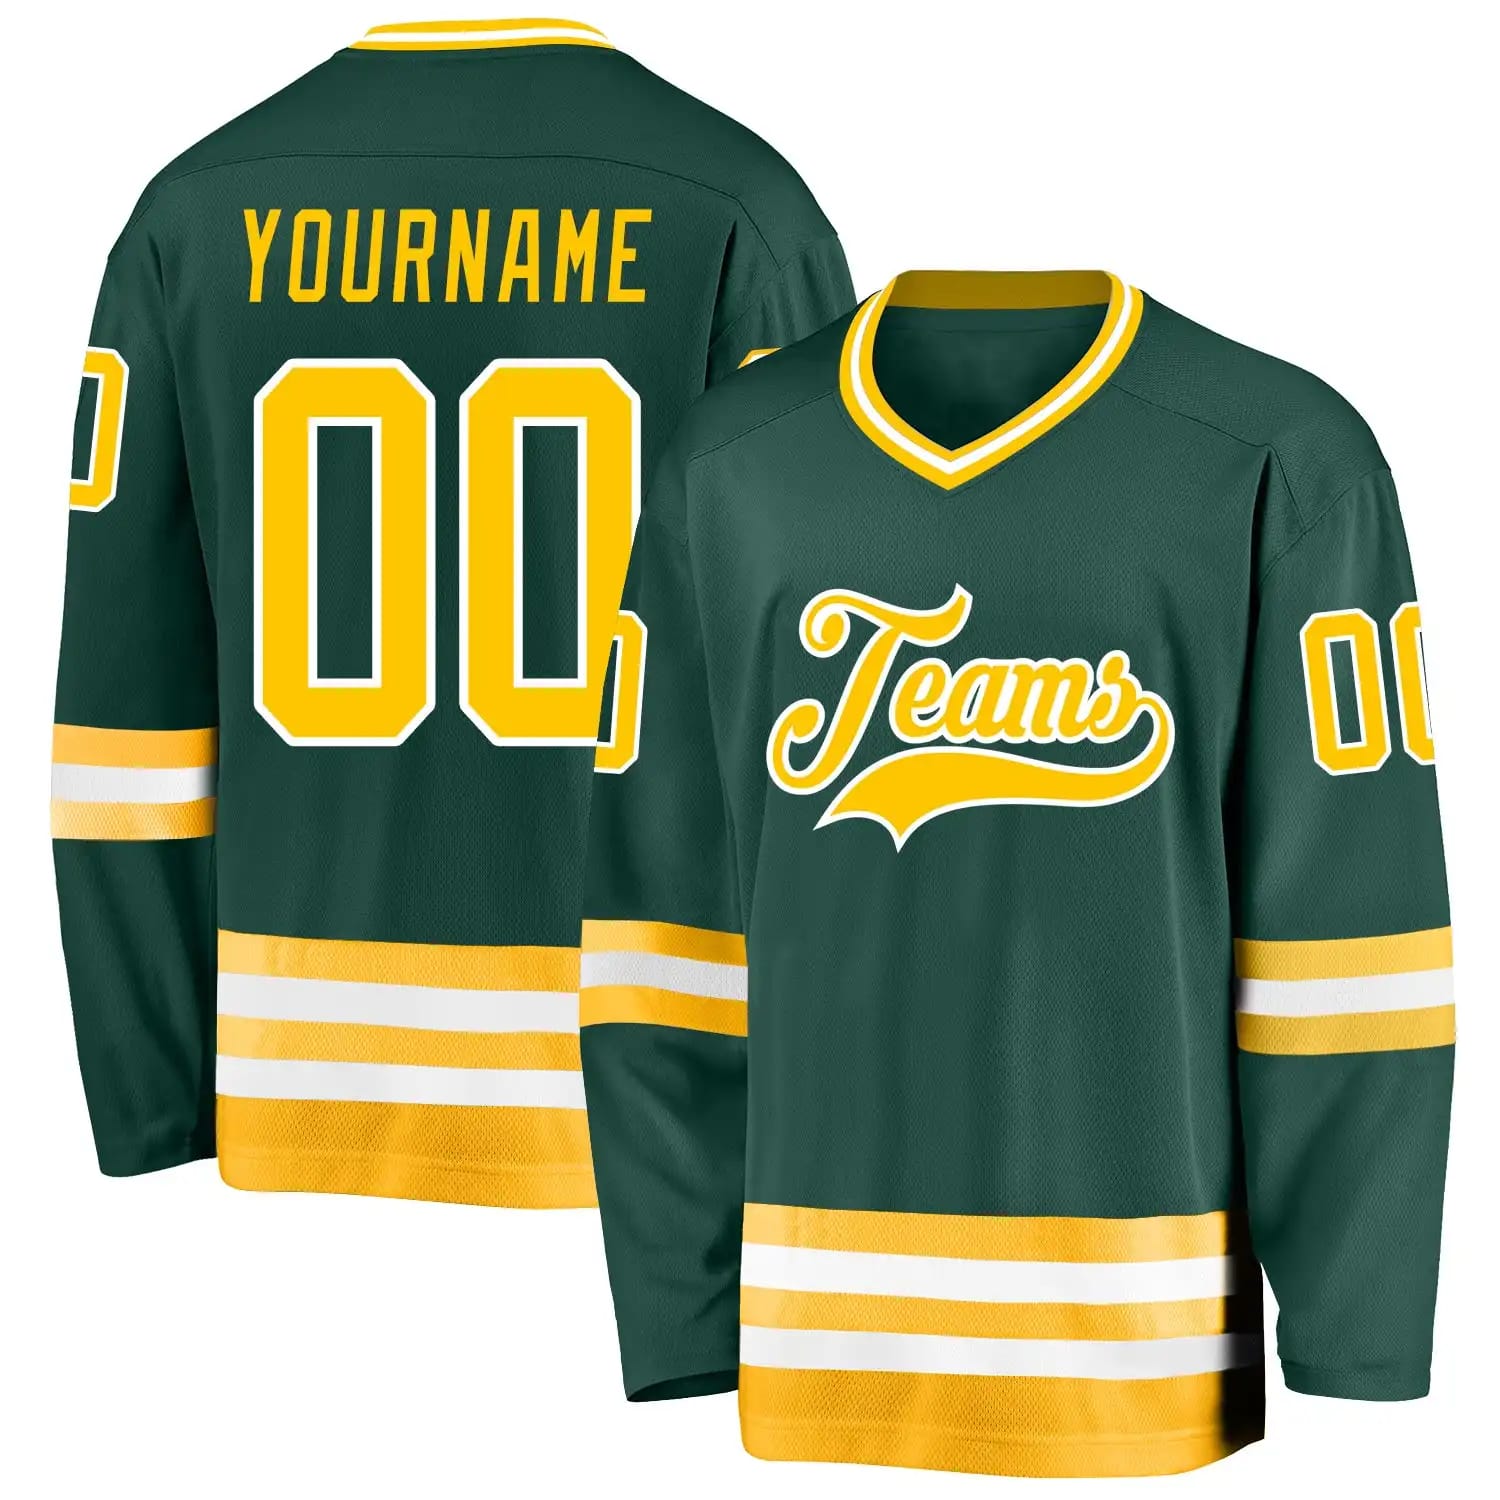 Stitched And Print Green Gold-white Hockey Jersey Custom